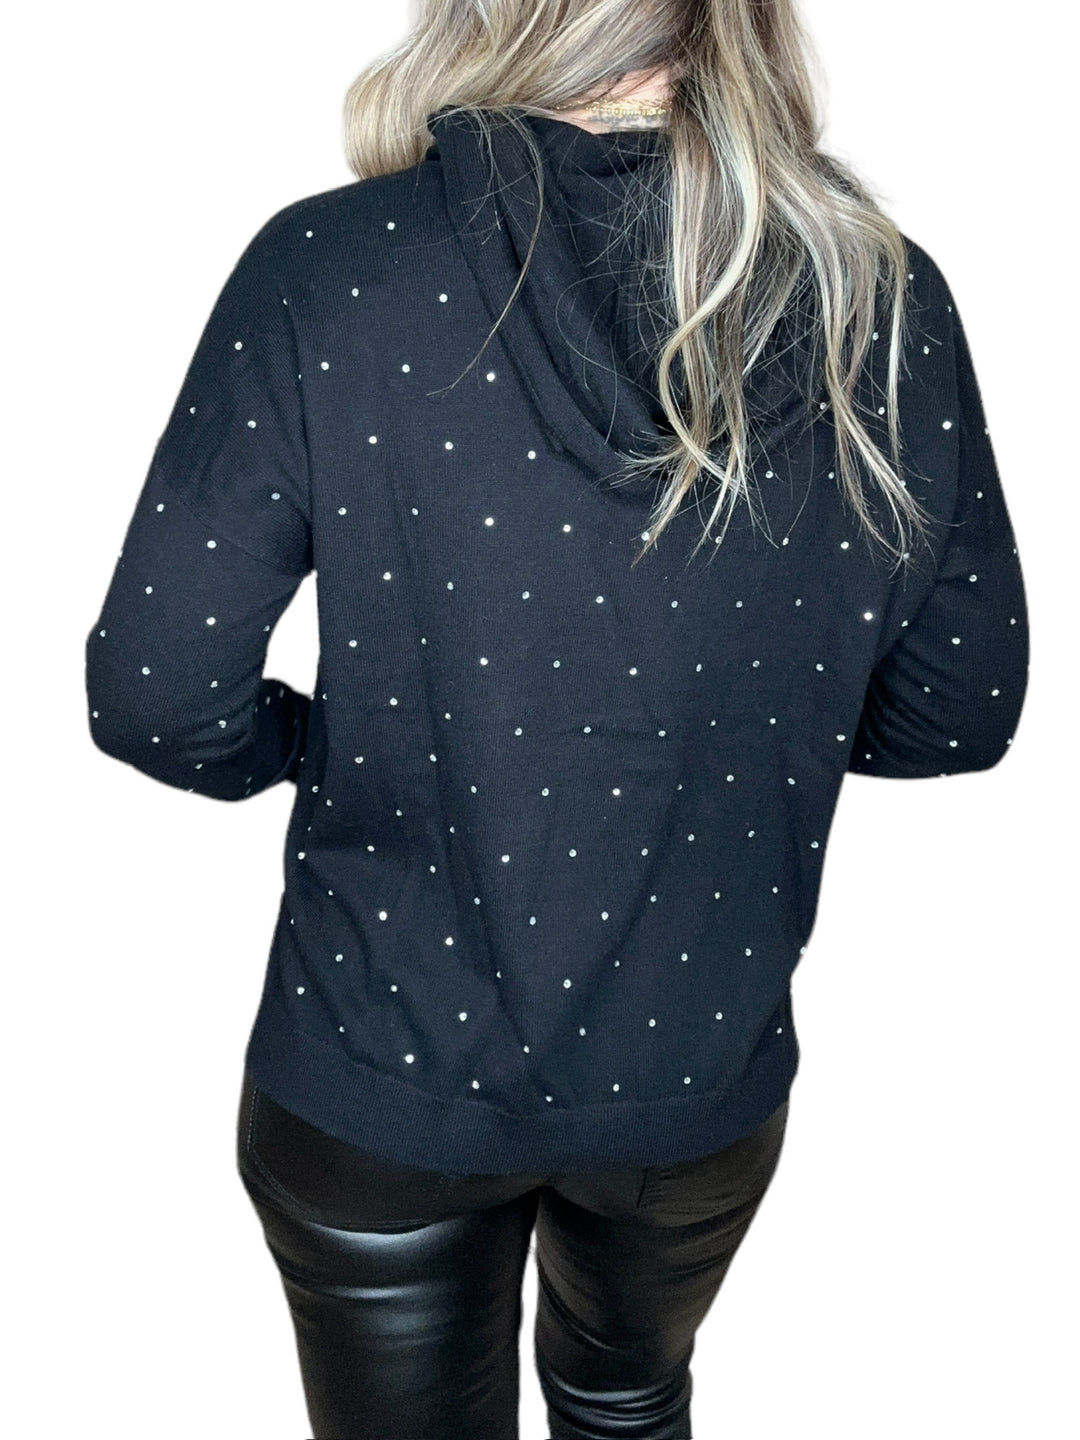 HOODIE WITH STONE ACCENTS-BLACK - Kingfisher Road - Online Boutique